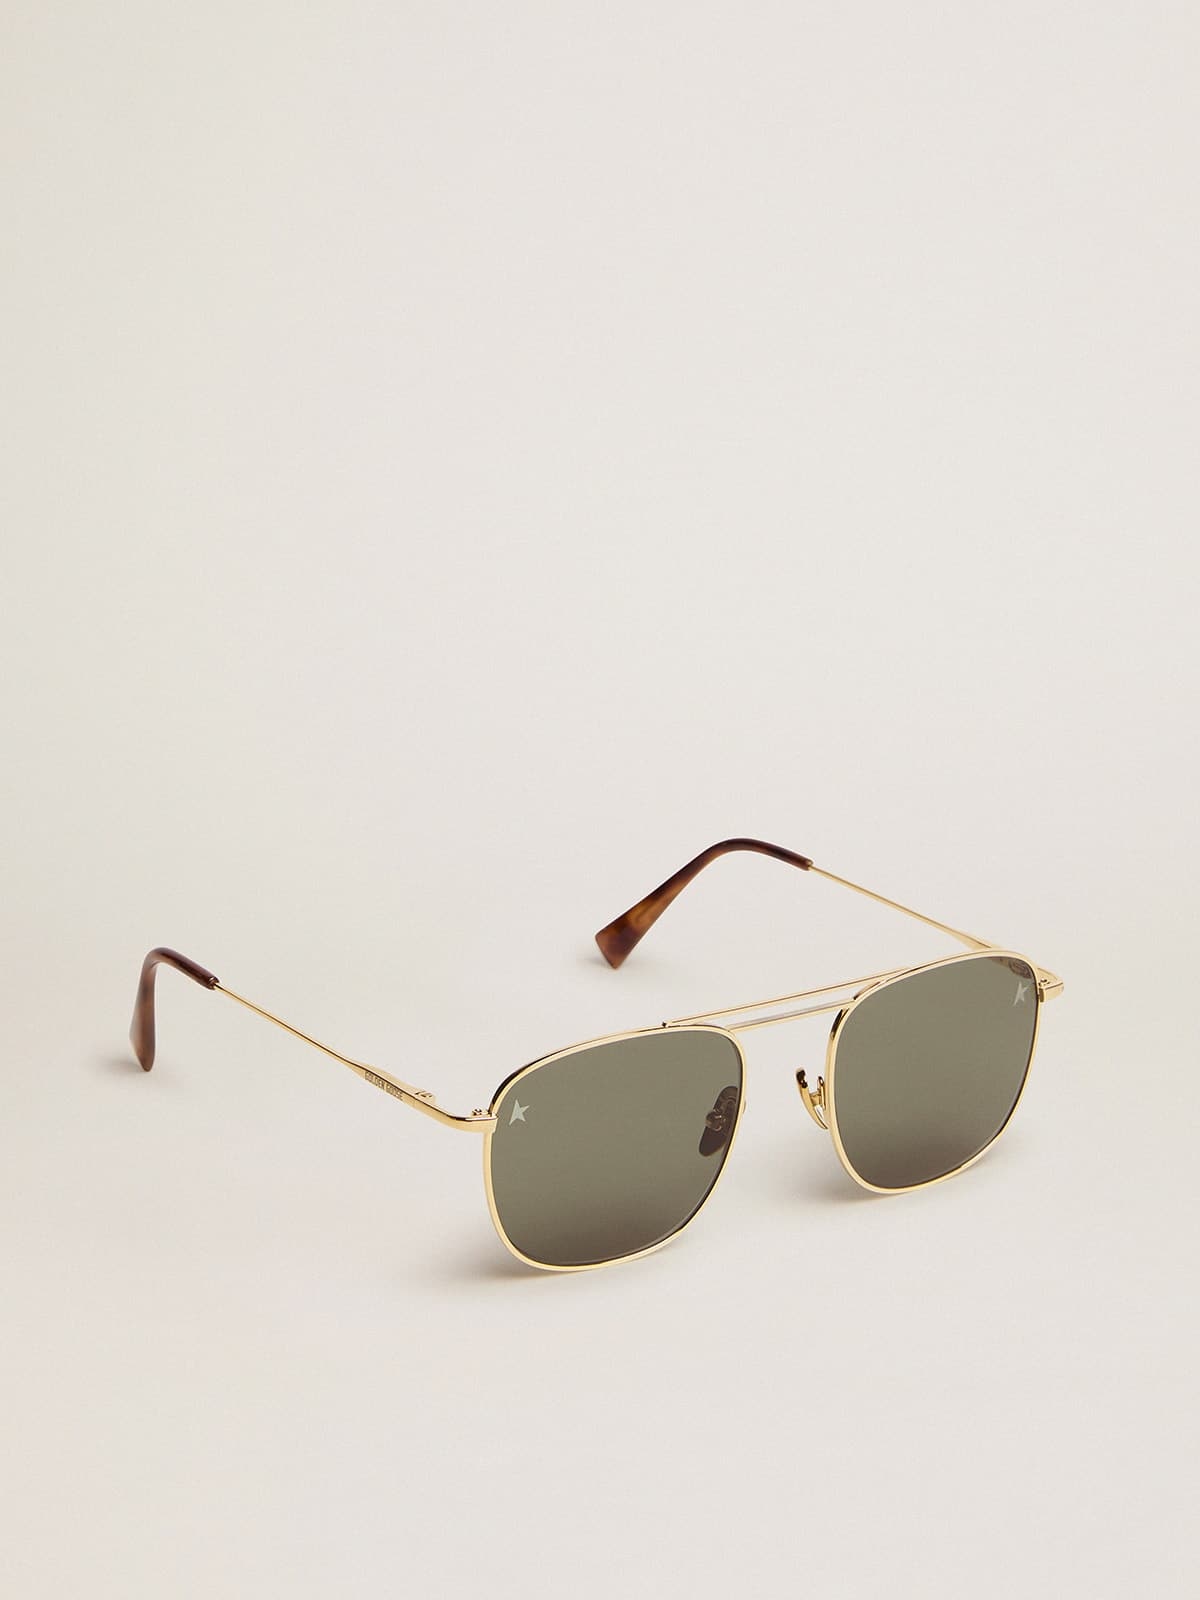 Aviator sunglasses with gold frame and green lenses - 1